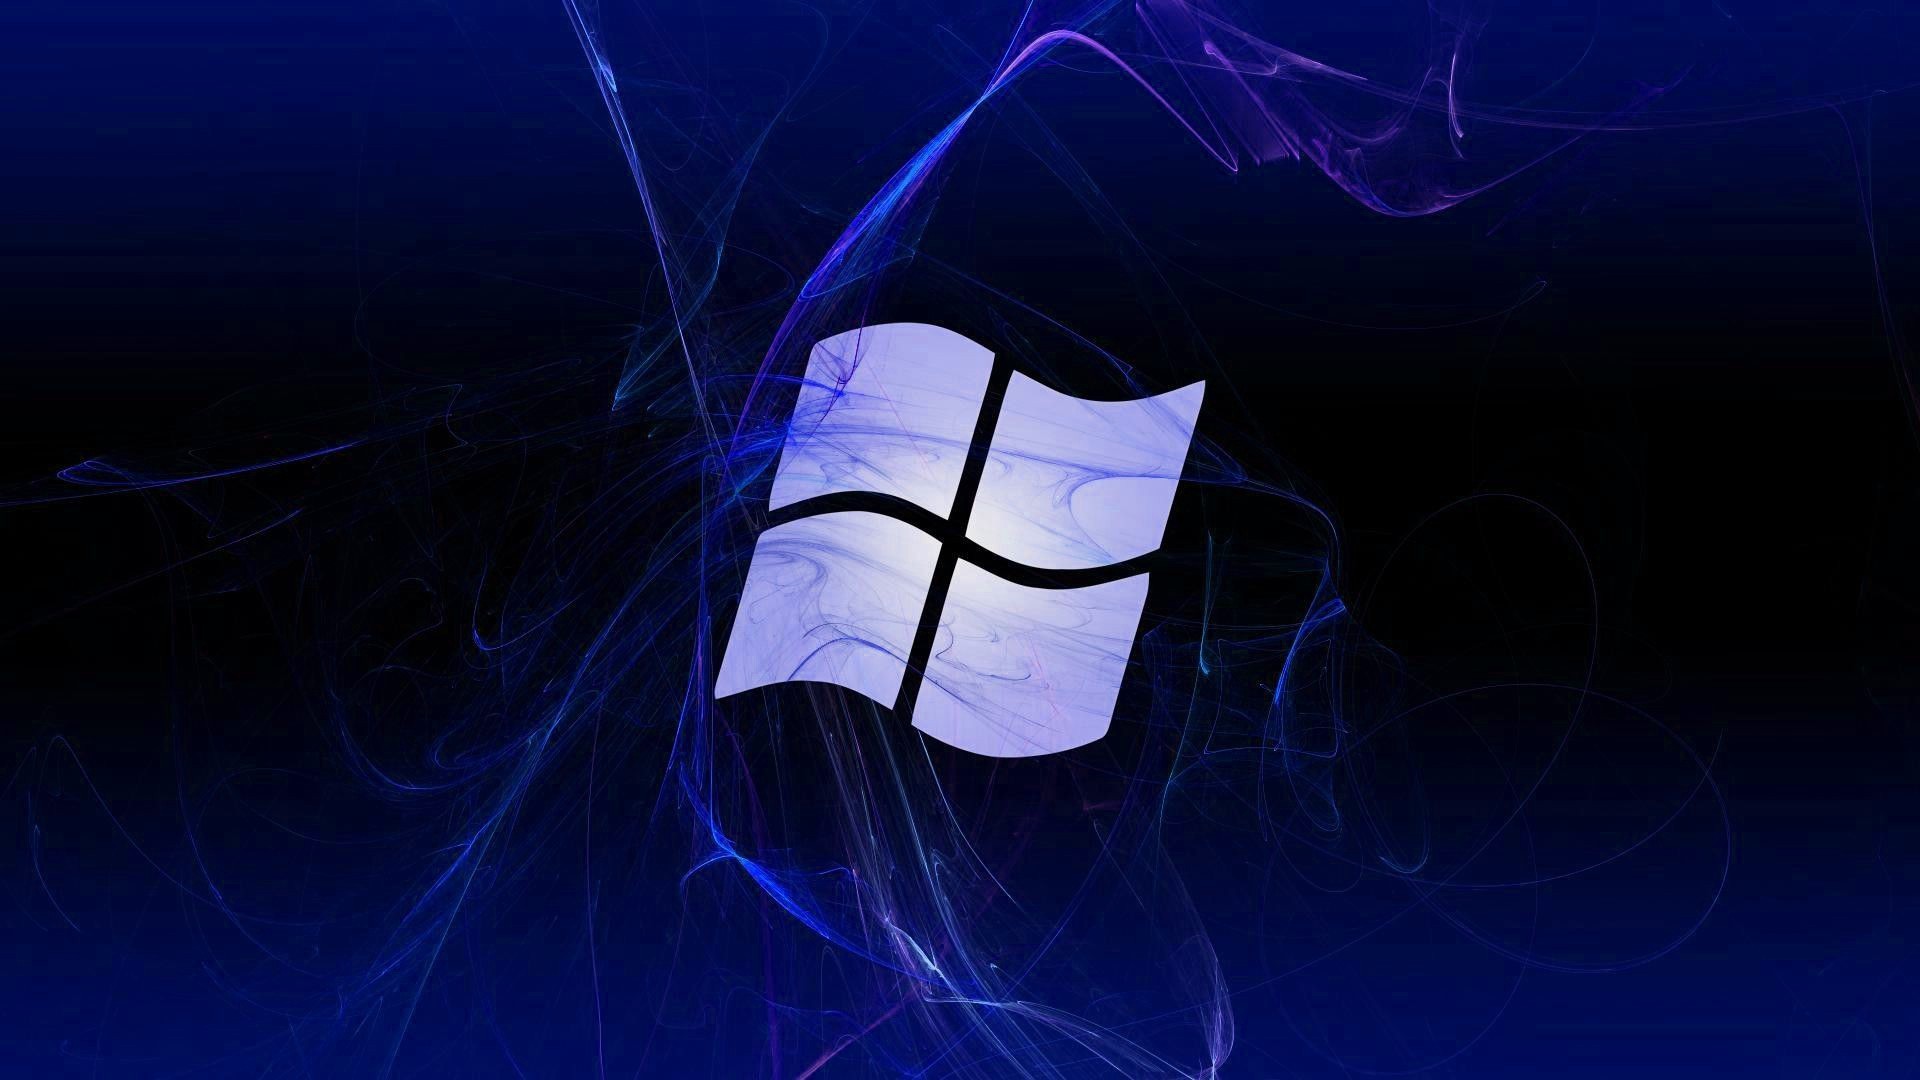 Windows 10, Windows 8 Wallpapers HD / Desktop and Mobile Backgrounds